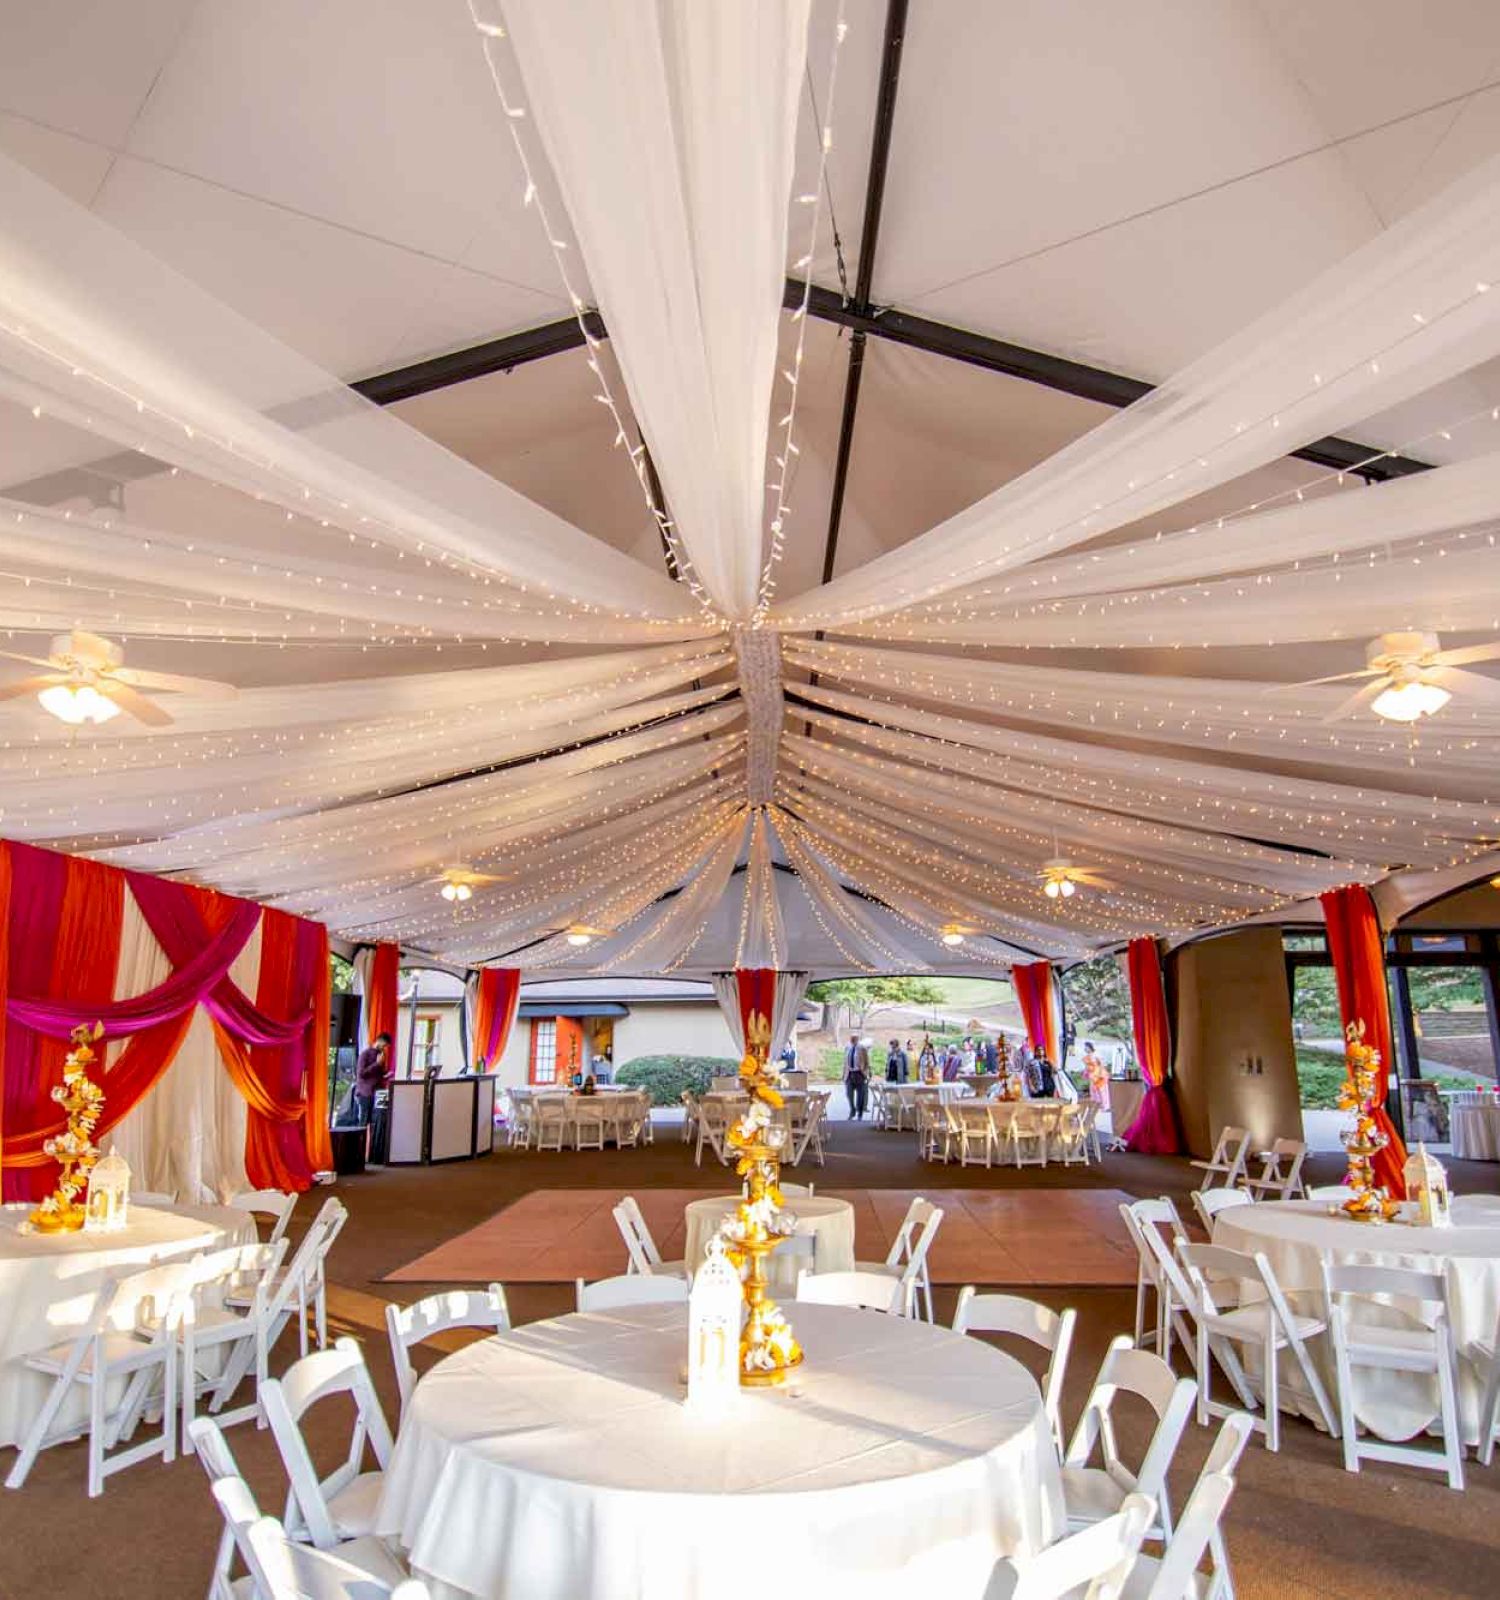 The image shows a decorated venue with white draped ceiling fabric, white tables and chairs, and golden centerpieces, likely set up for a wedding or event.